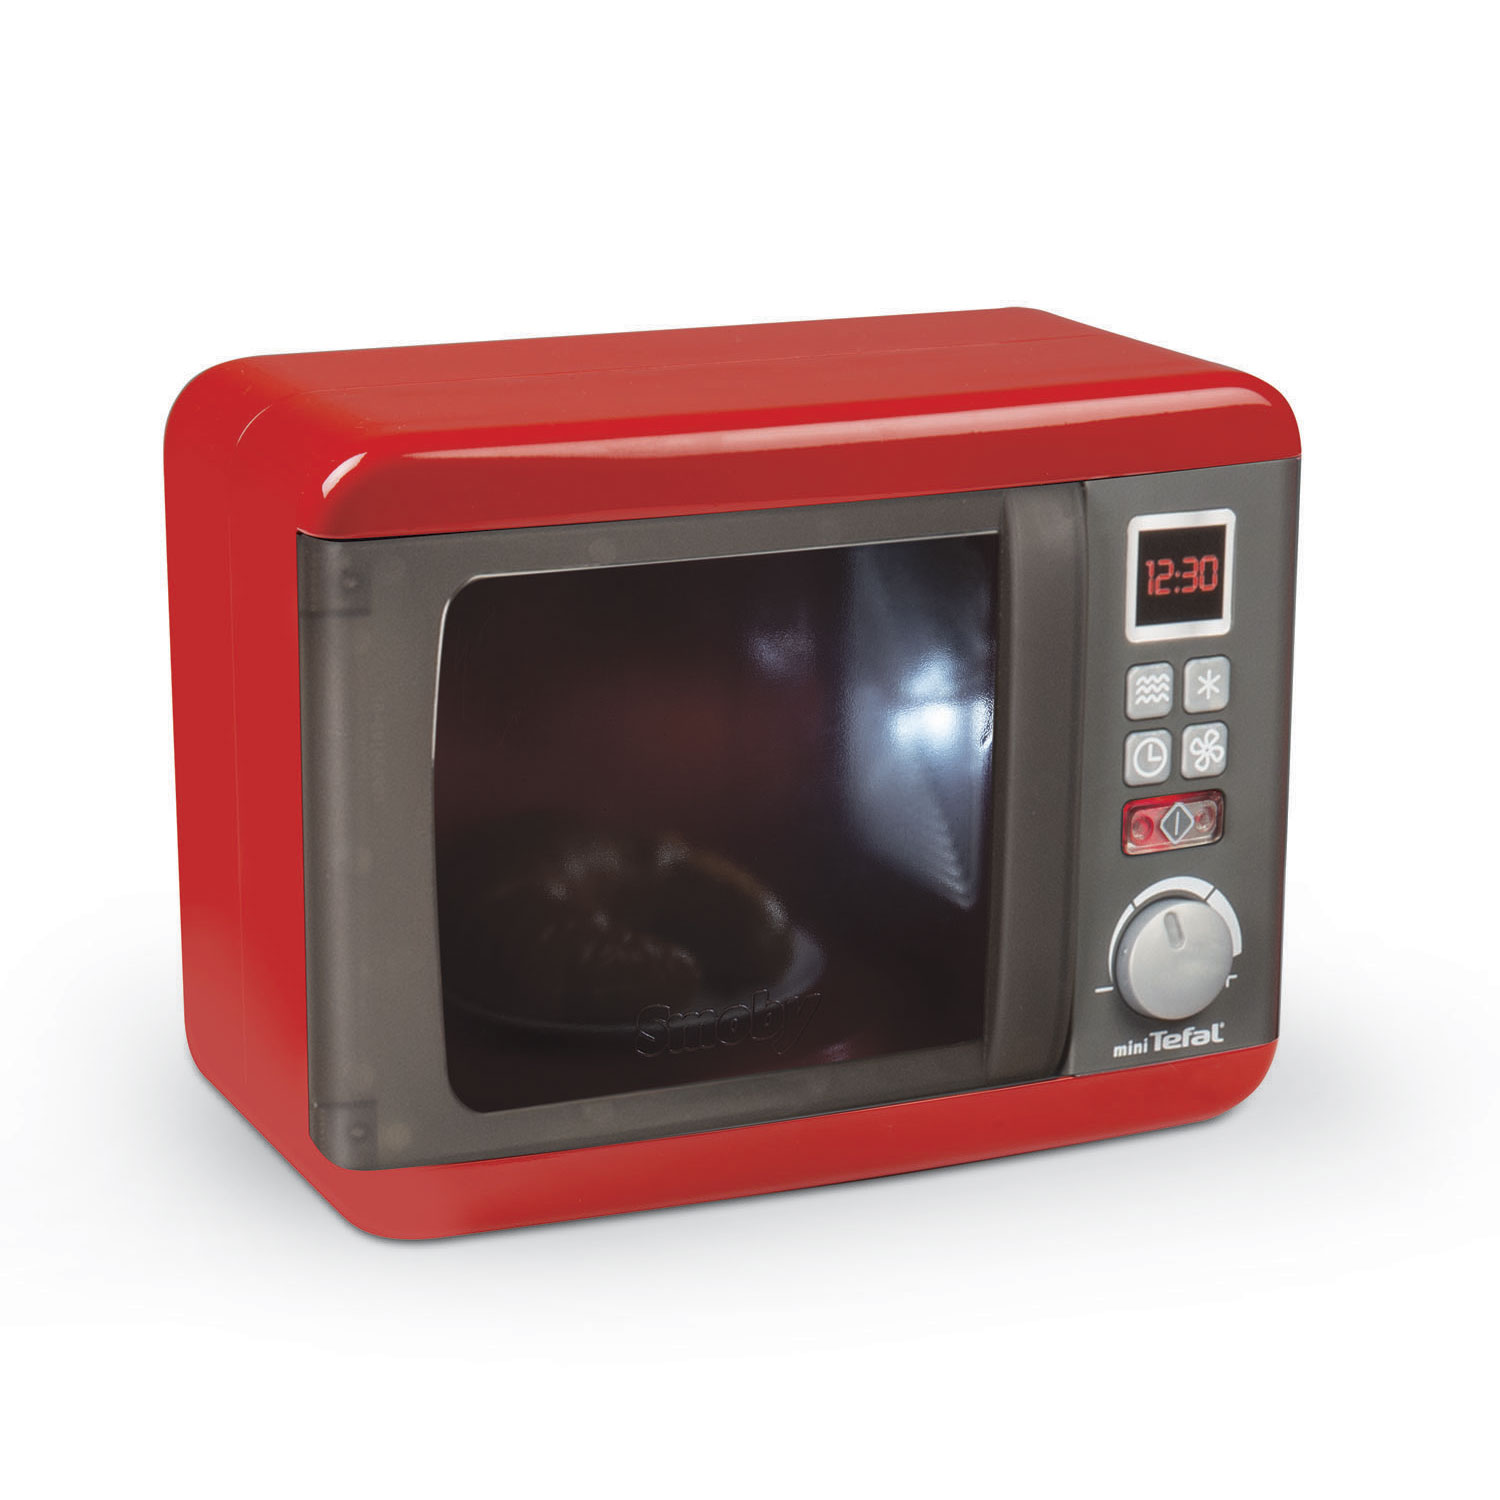 Smoby Tefal Magnetron online | Speelgoed